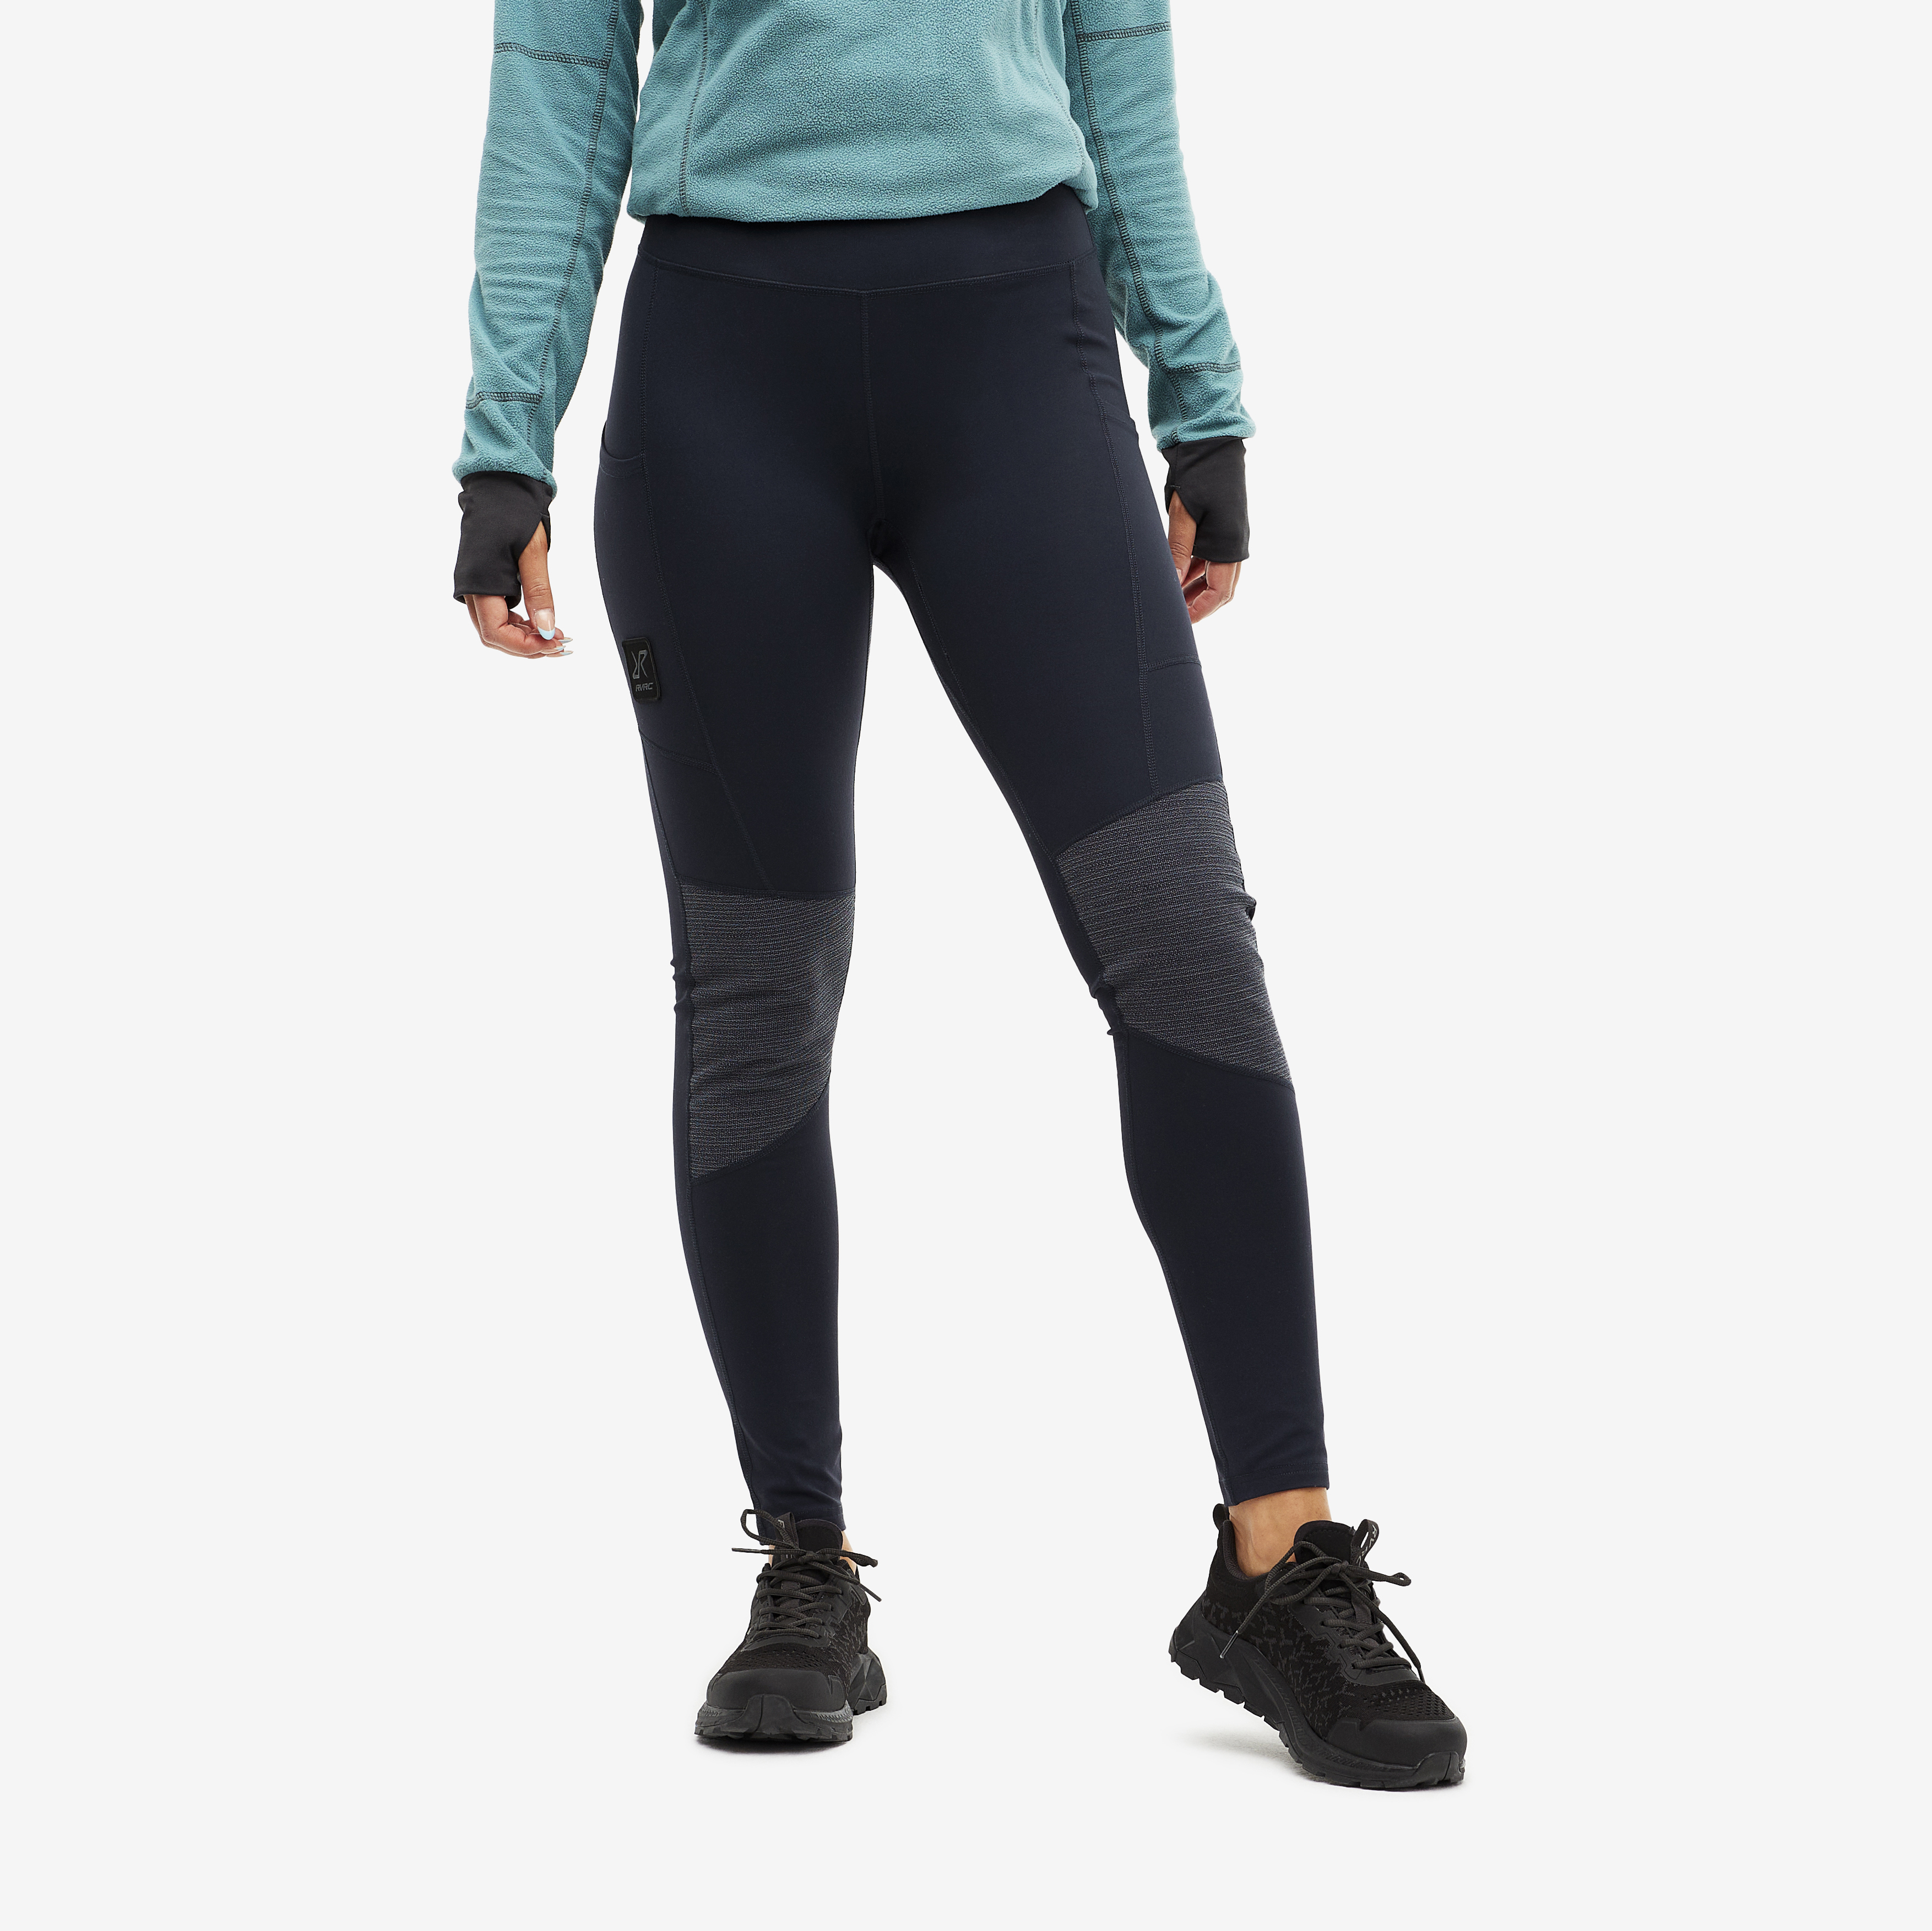 Summit Core Tights - Dam - Peacemaker Blue, Storlek:XL - Outdoor Tights